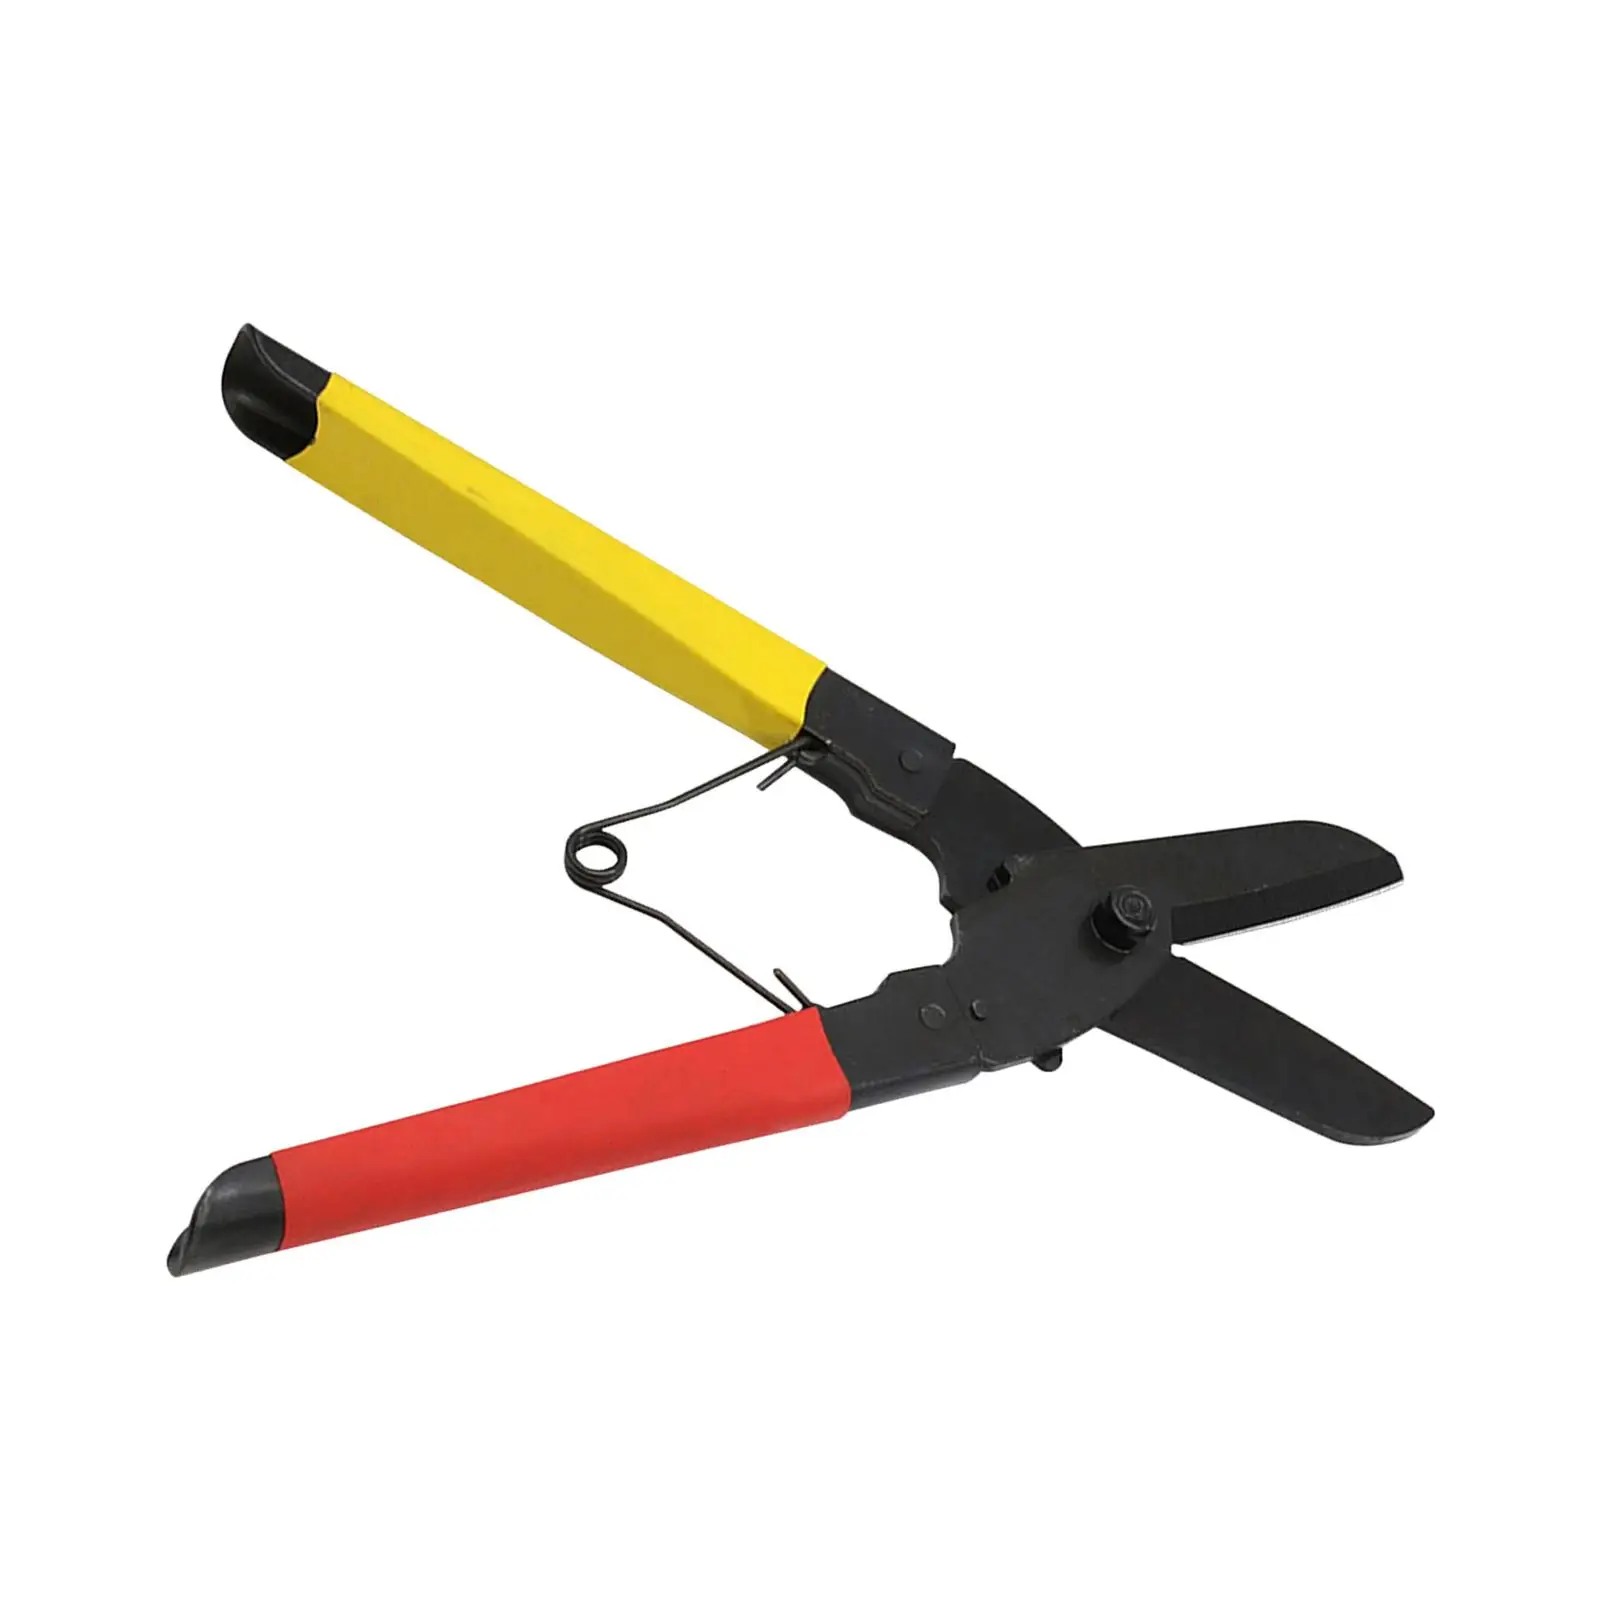 Heavy Duty Hand Shear Ergonomic Handle Industrial Grade Scissors for Plate Cables Thin Metal Plate Cardboard Carpet